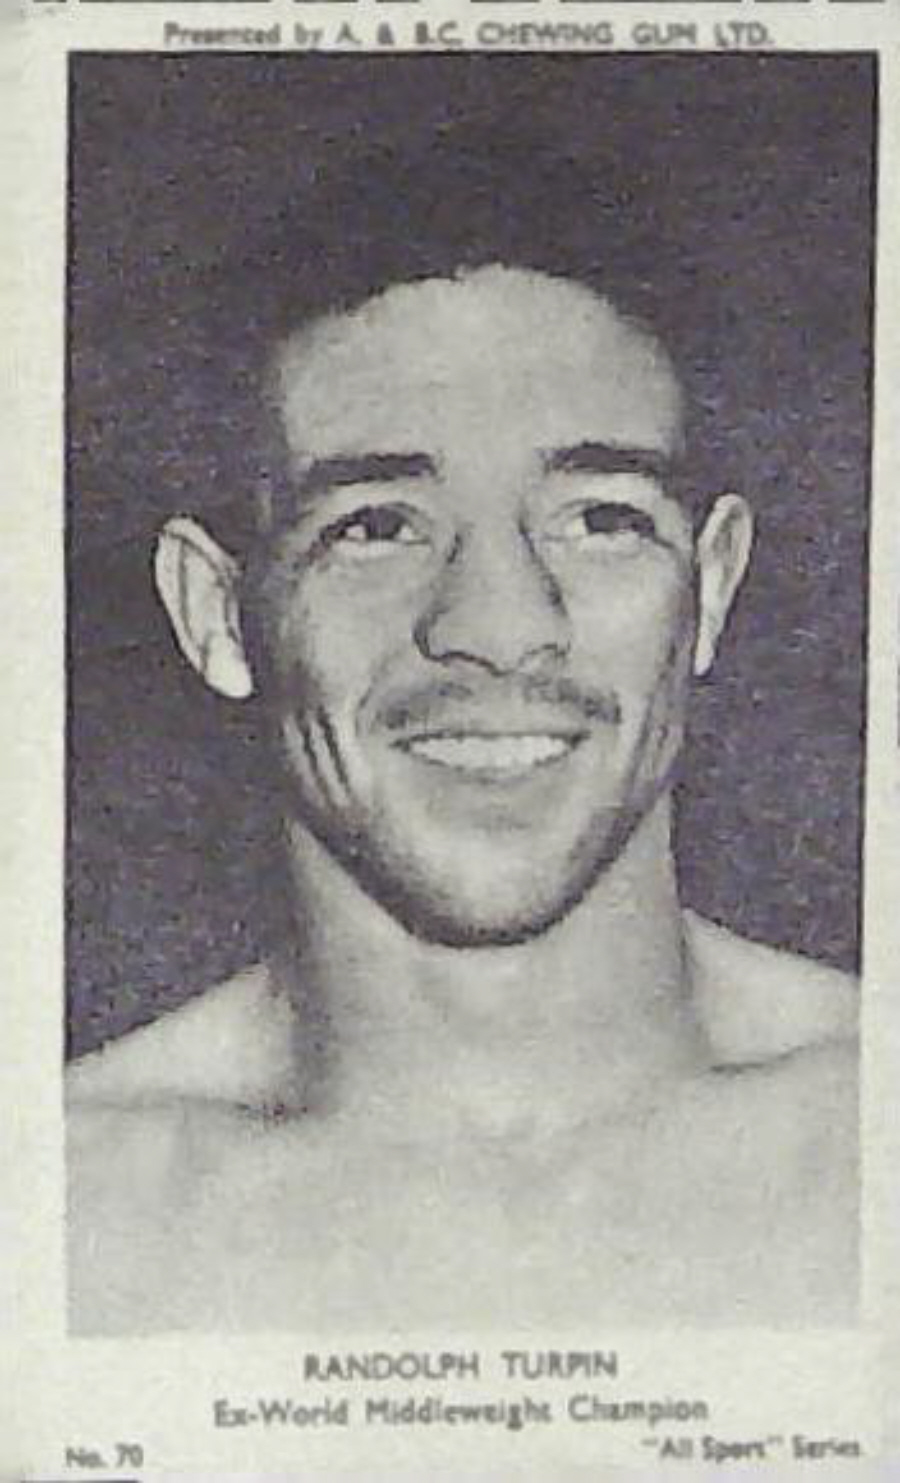 A & B C 1954 All Sports Boxing Randolph Turpin Middleweight No 70